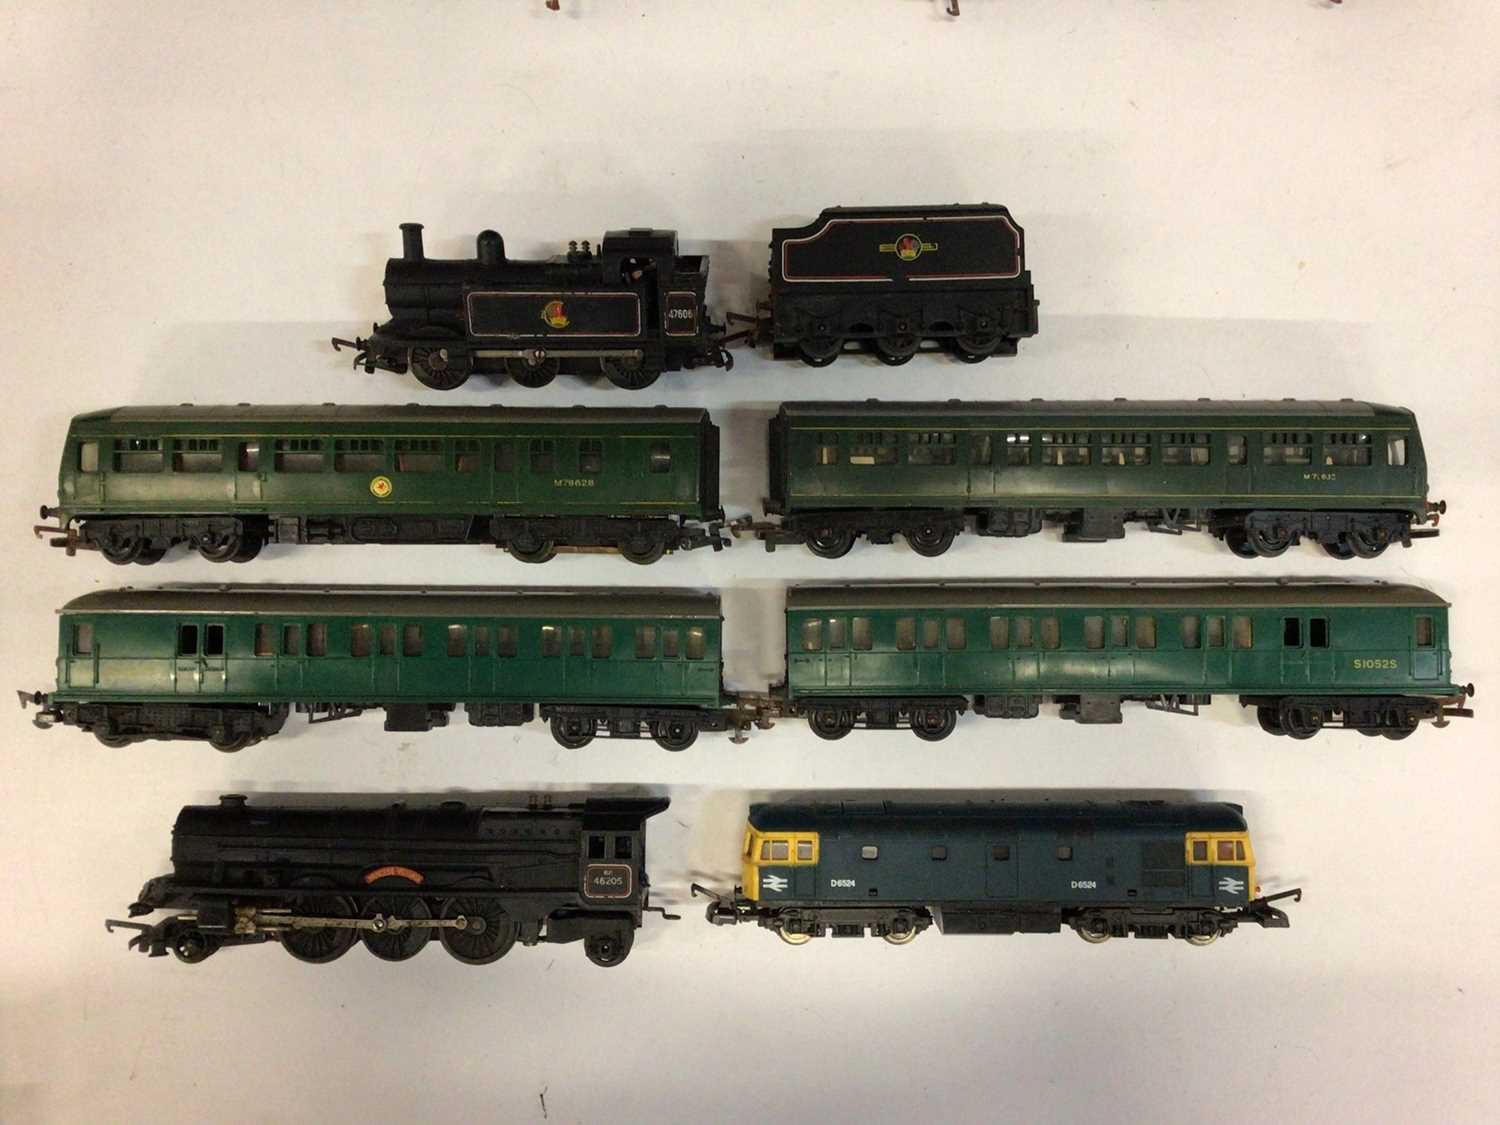 Railway 00 gauge unboxed selection including locomotives, carriages, rolling stock and accessories.